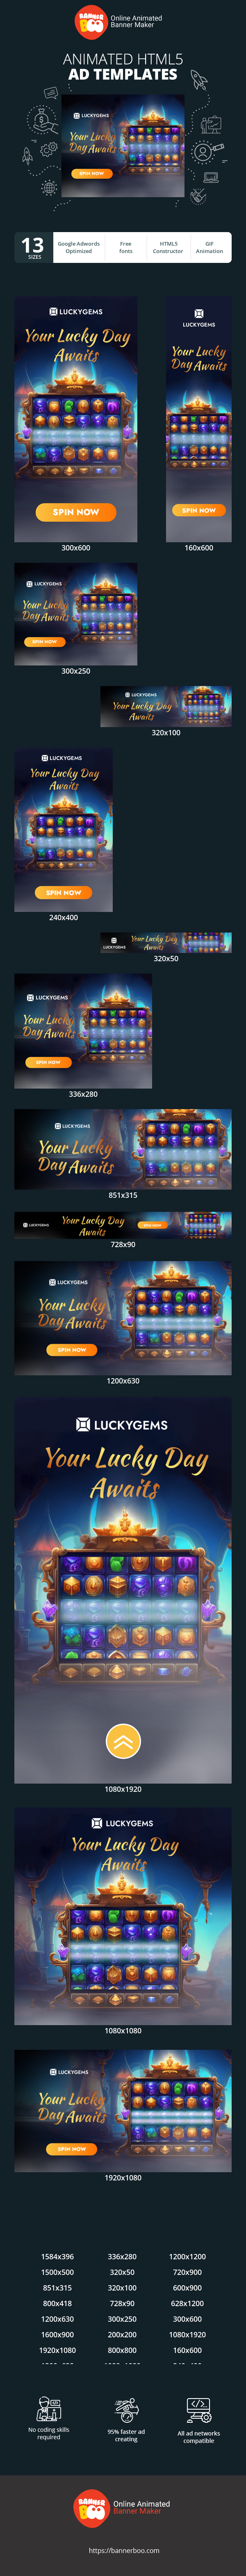 Banner ad template — Your Lucky Day Awaits — Gambling